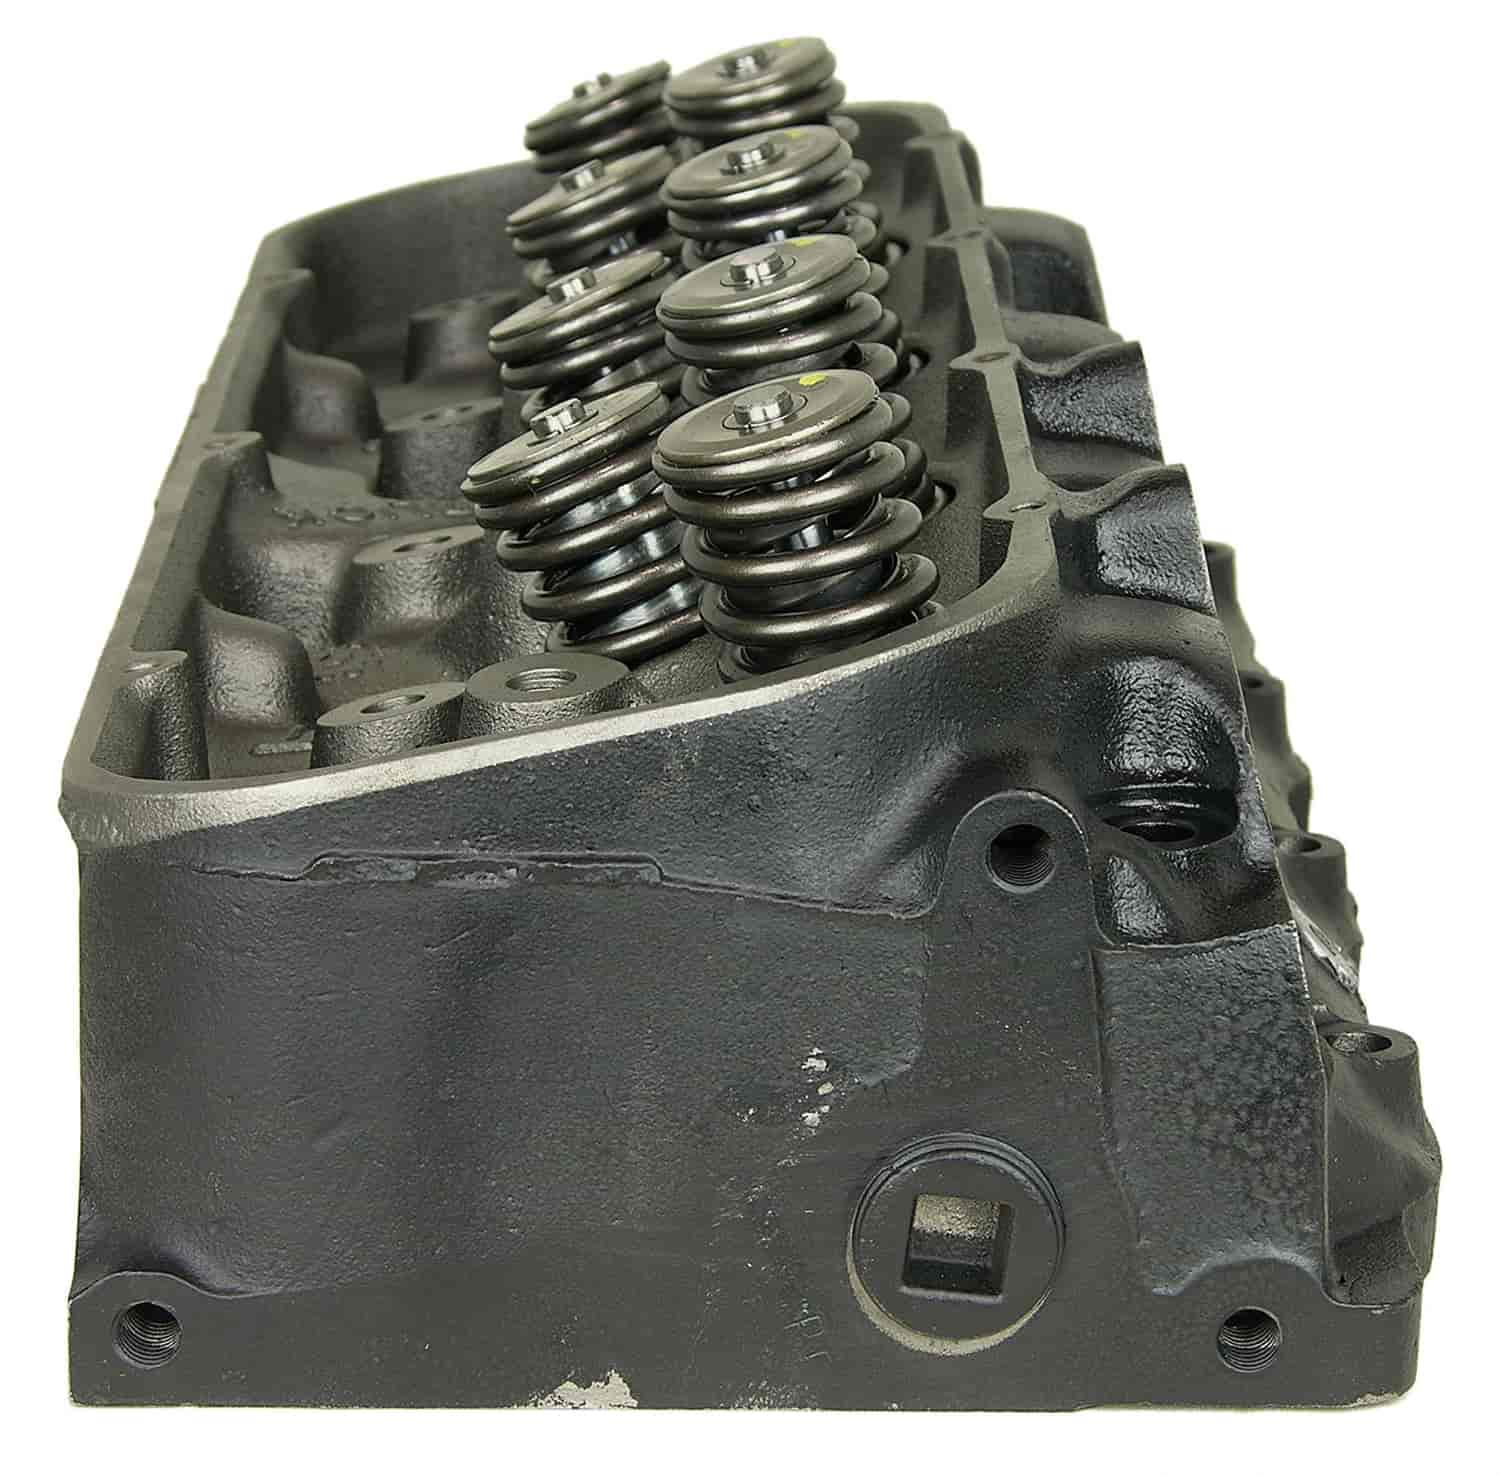 Remanufactured Cylinder Head for 1980-1991 Chevy/GMC Medium Duty Truck with CNG 366ci/6.0L V8